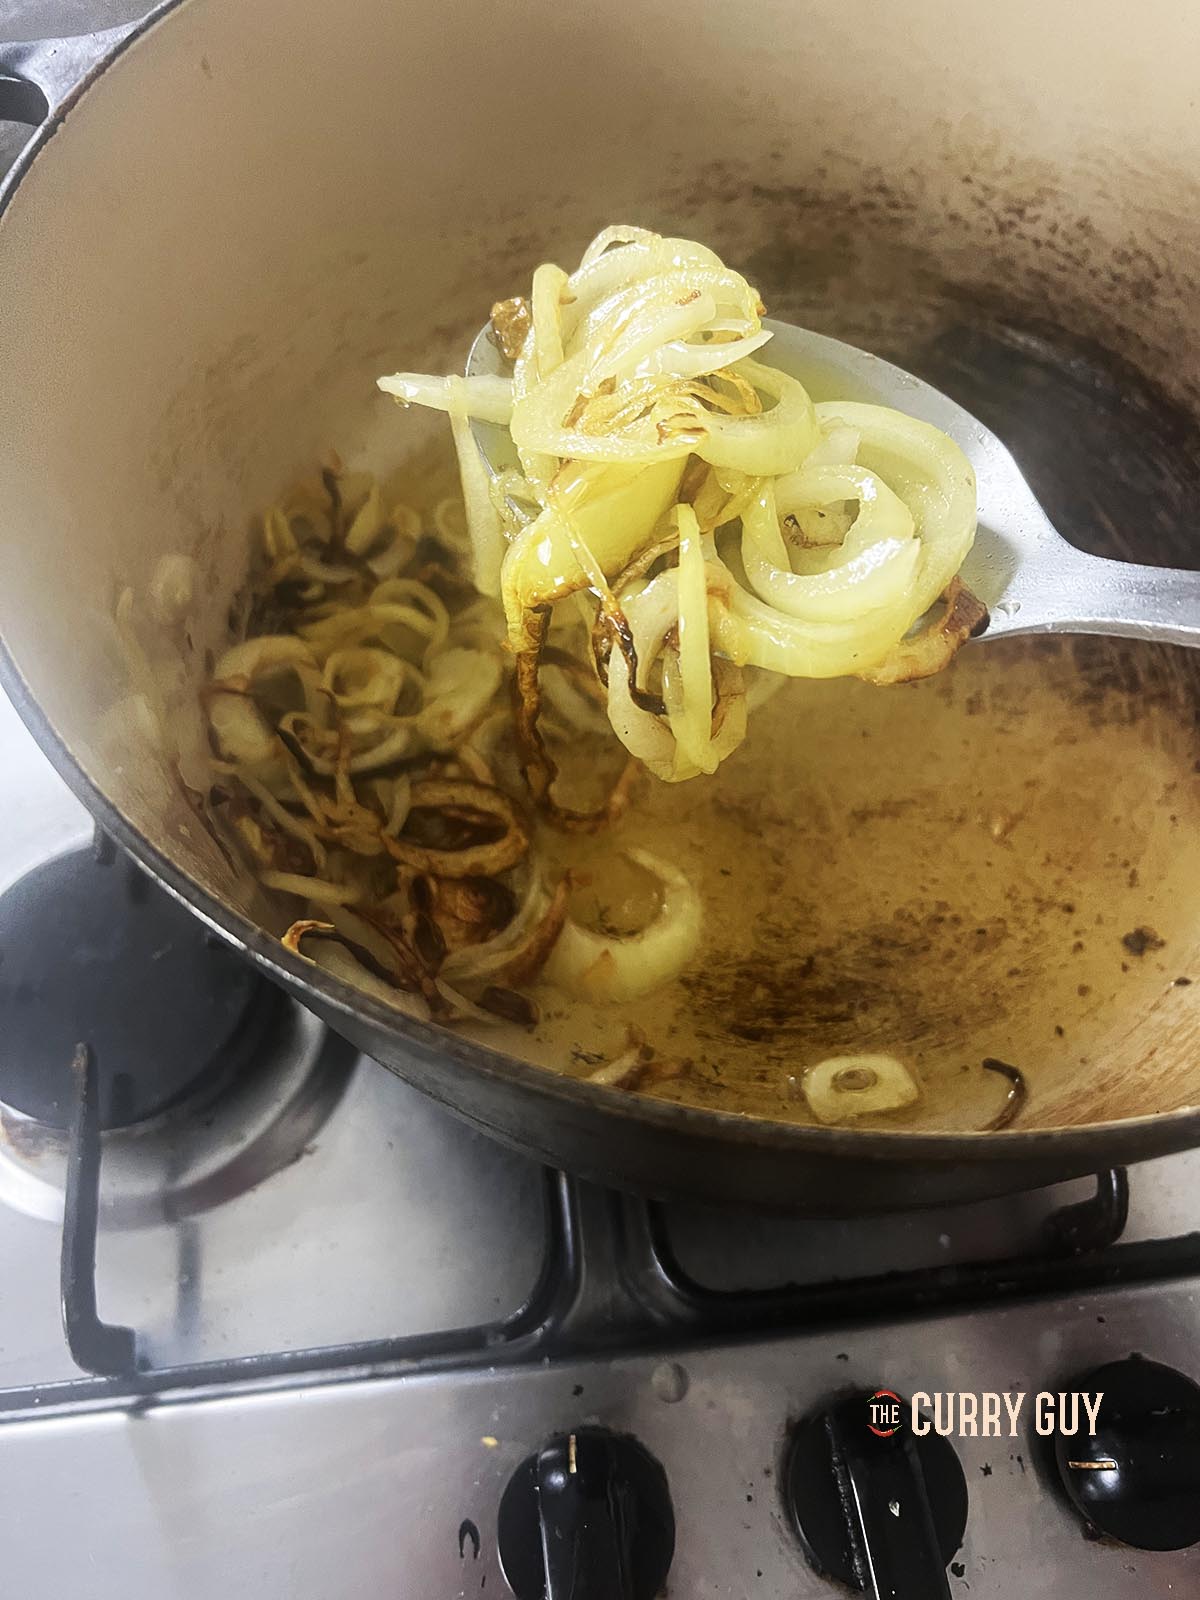 Transferring the onions and garlic to a plate.